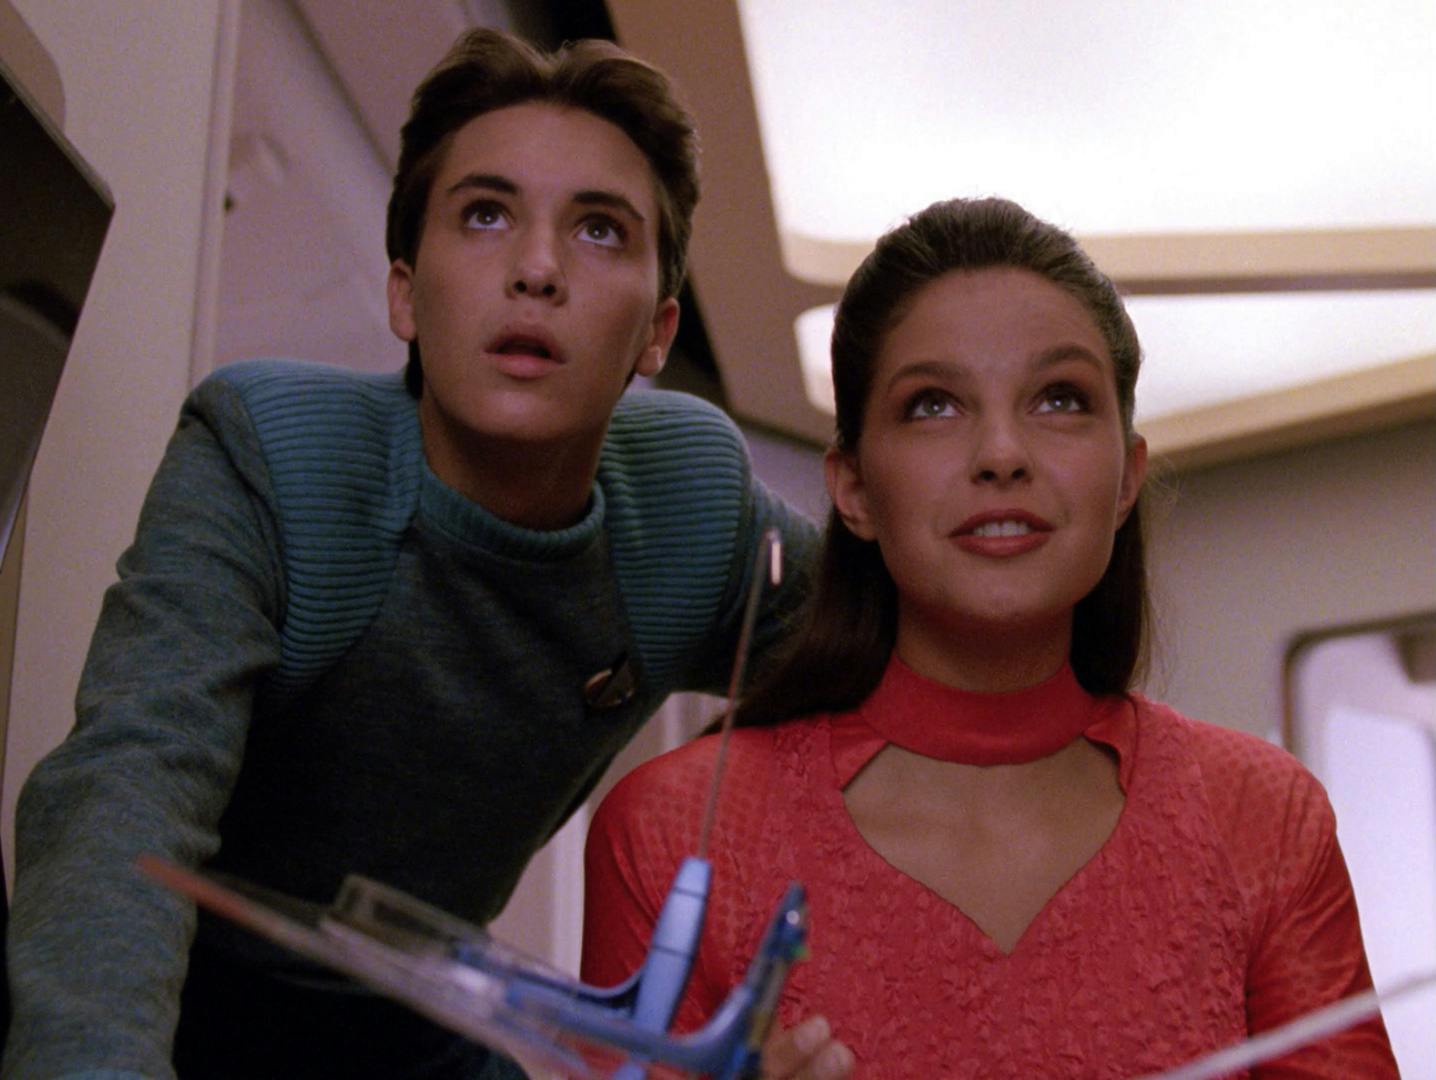 Wesley Crusher and Robin Lefler learn more about the addictive game overtaking the Enterprise in 'The Game'